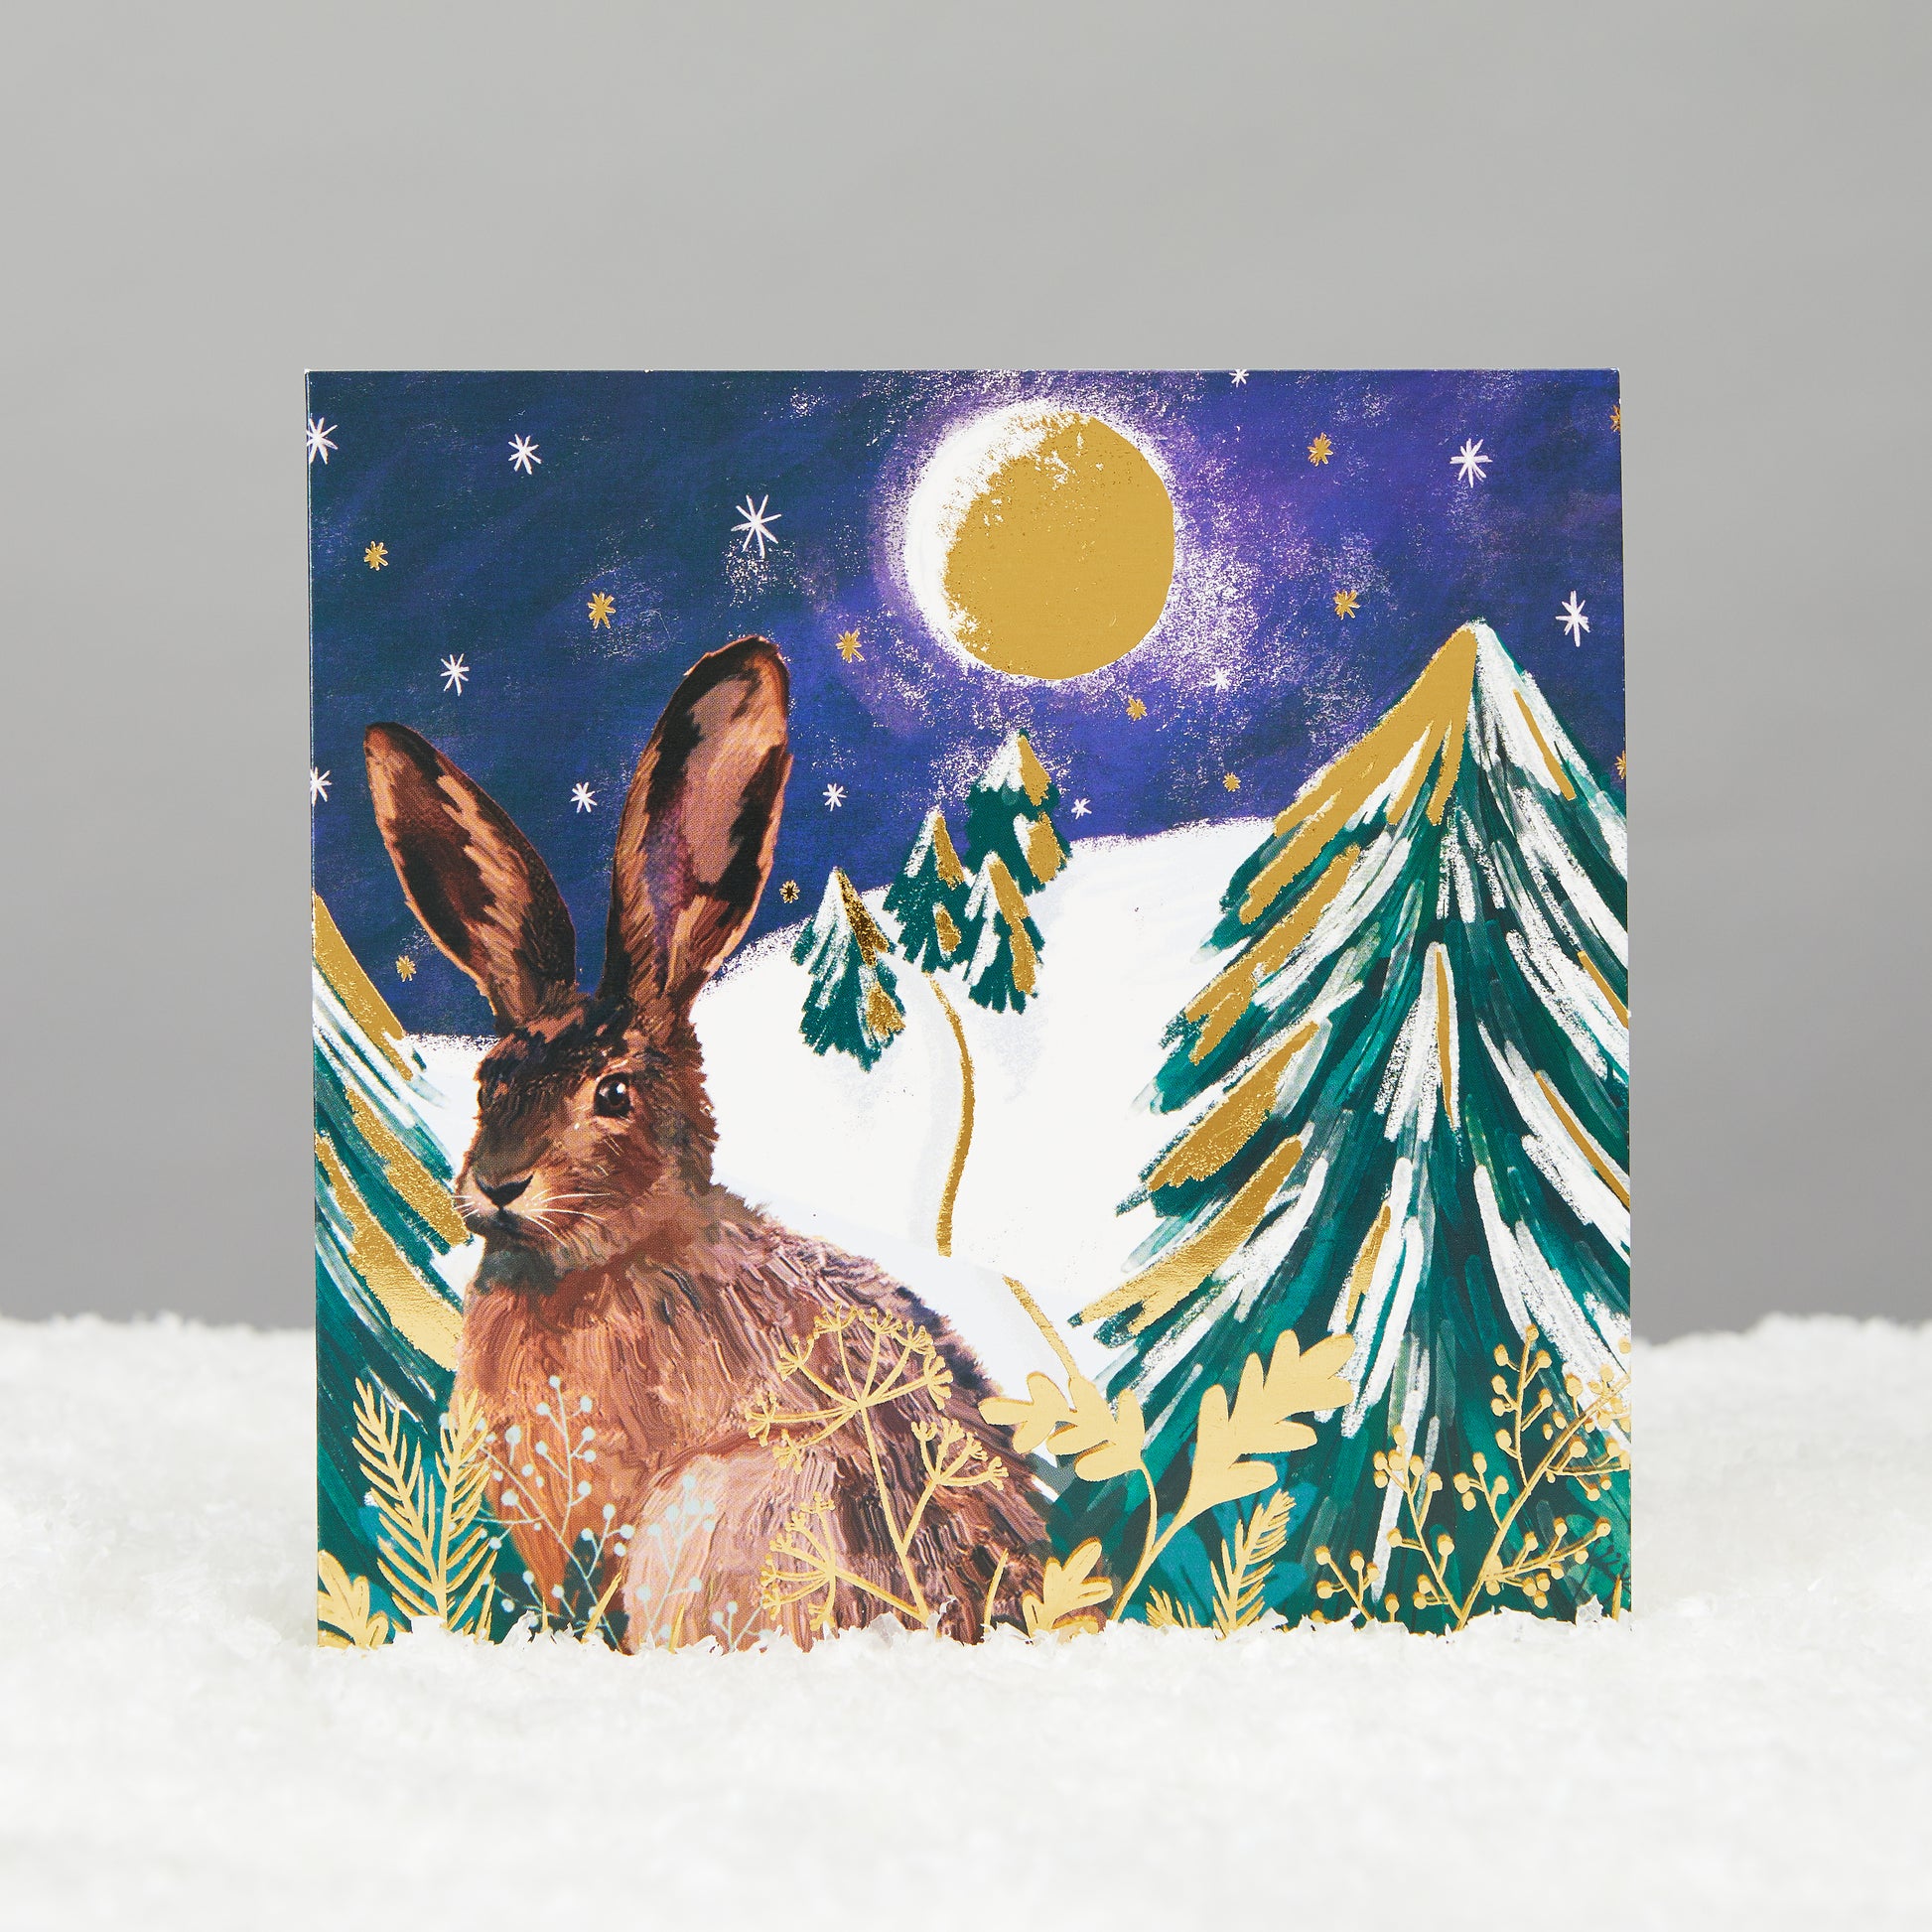 square card showing a hare at night with a full moon